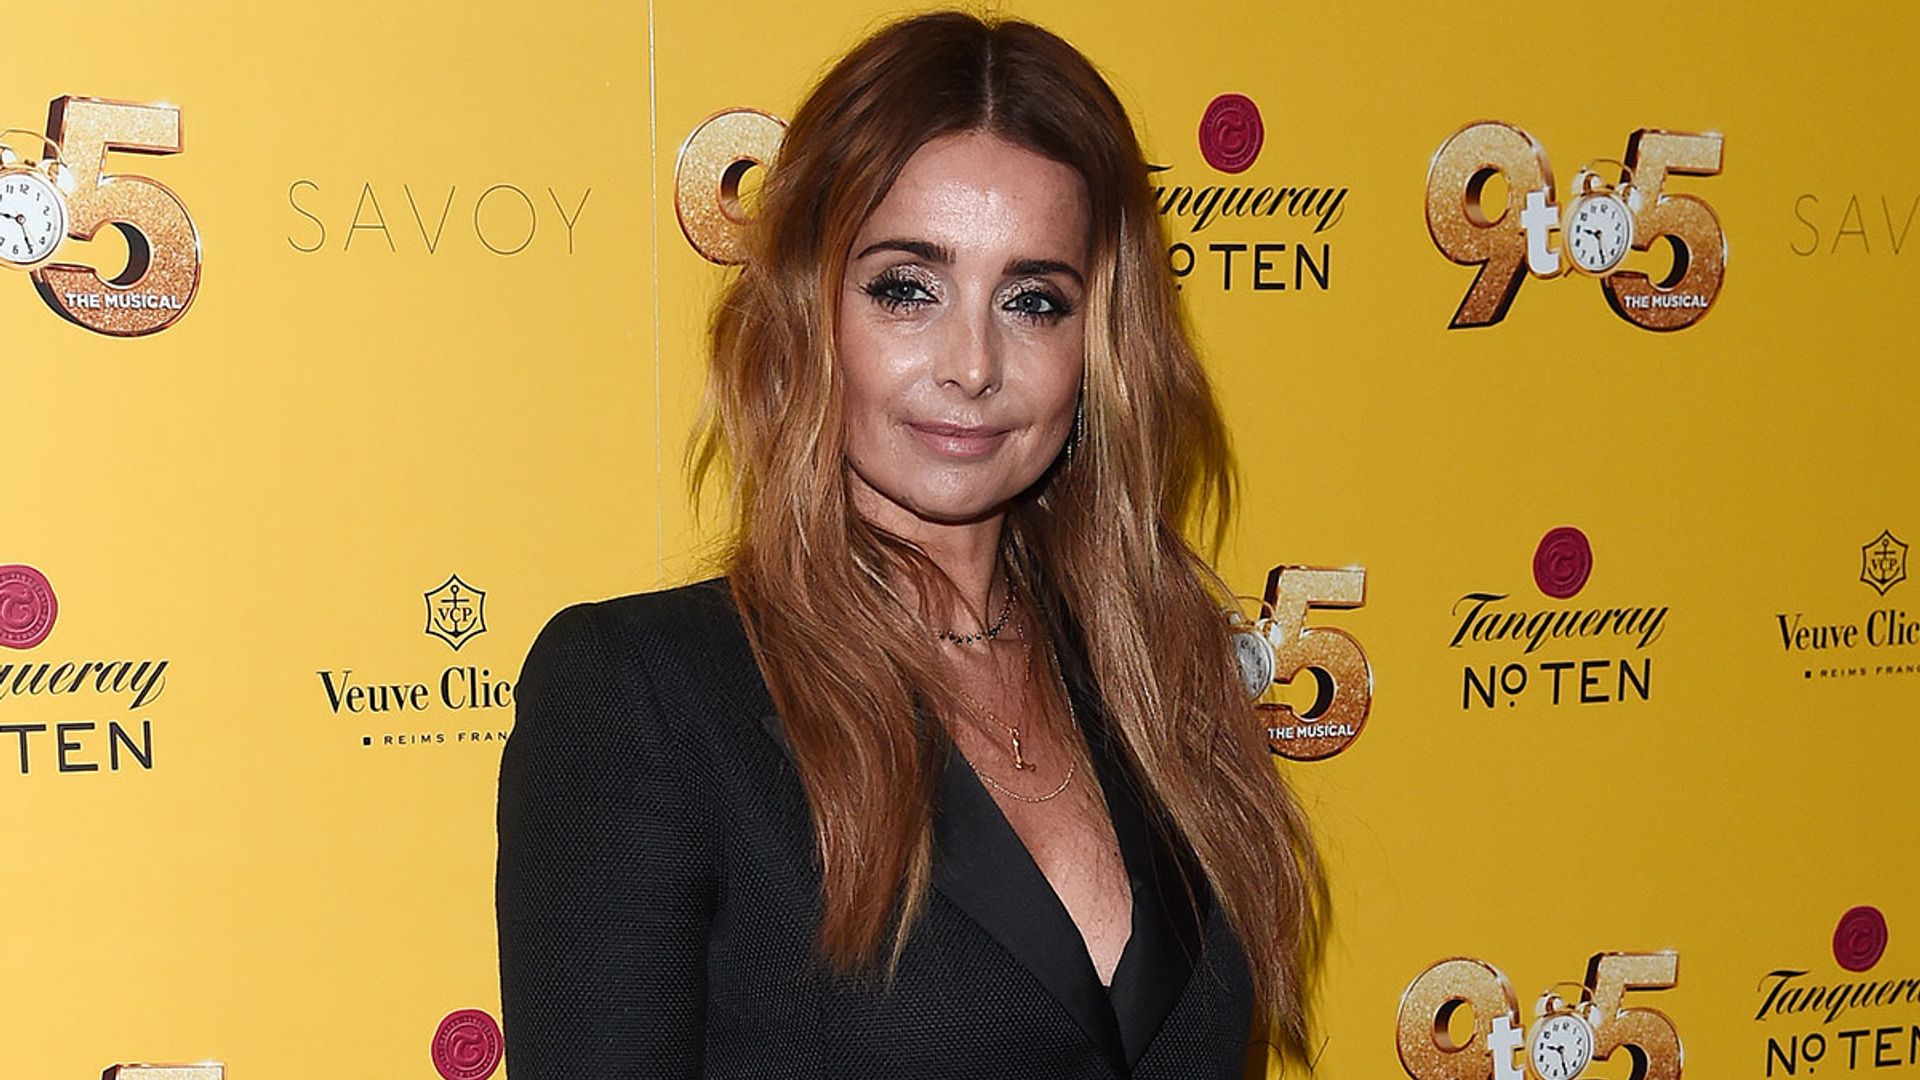 Louise Redknapp shows her support to 9 to 5 replacement in the sweetest way